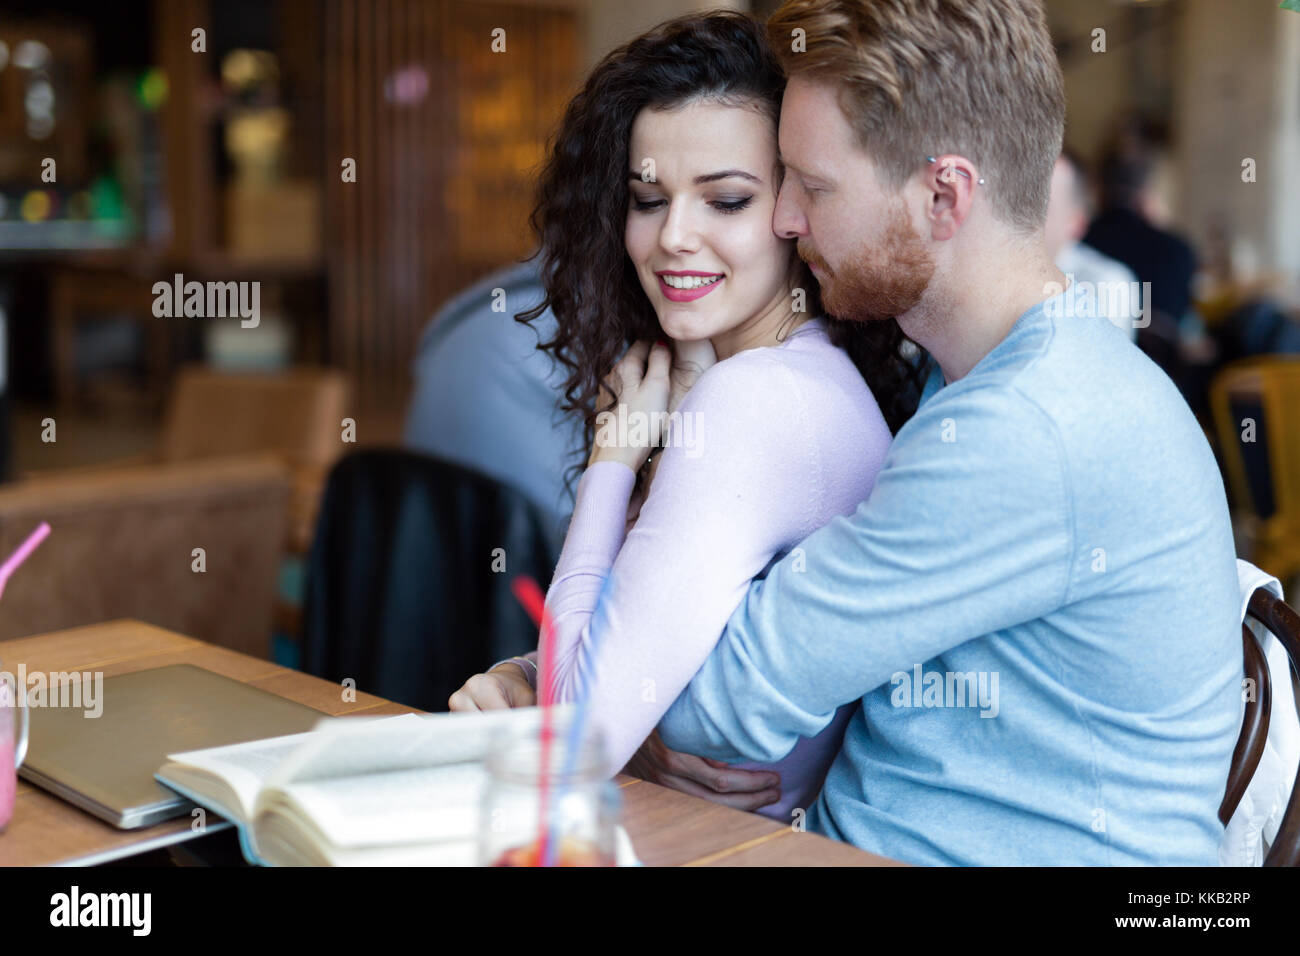 Young couple on date in coffee shop Stock Photo